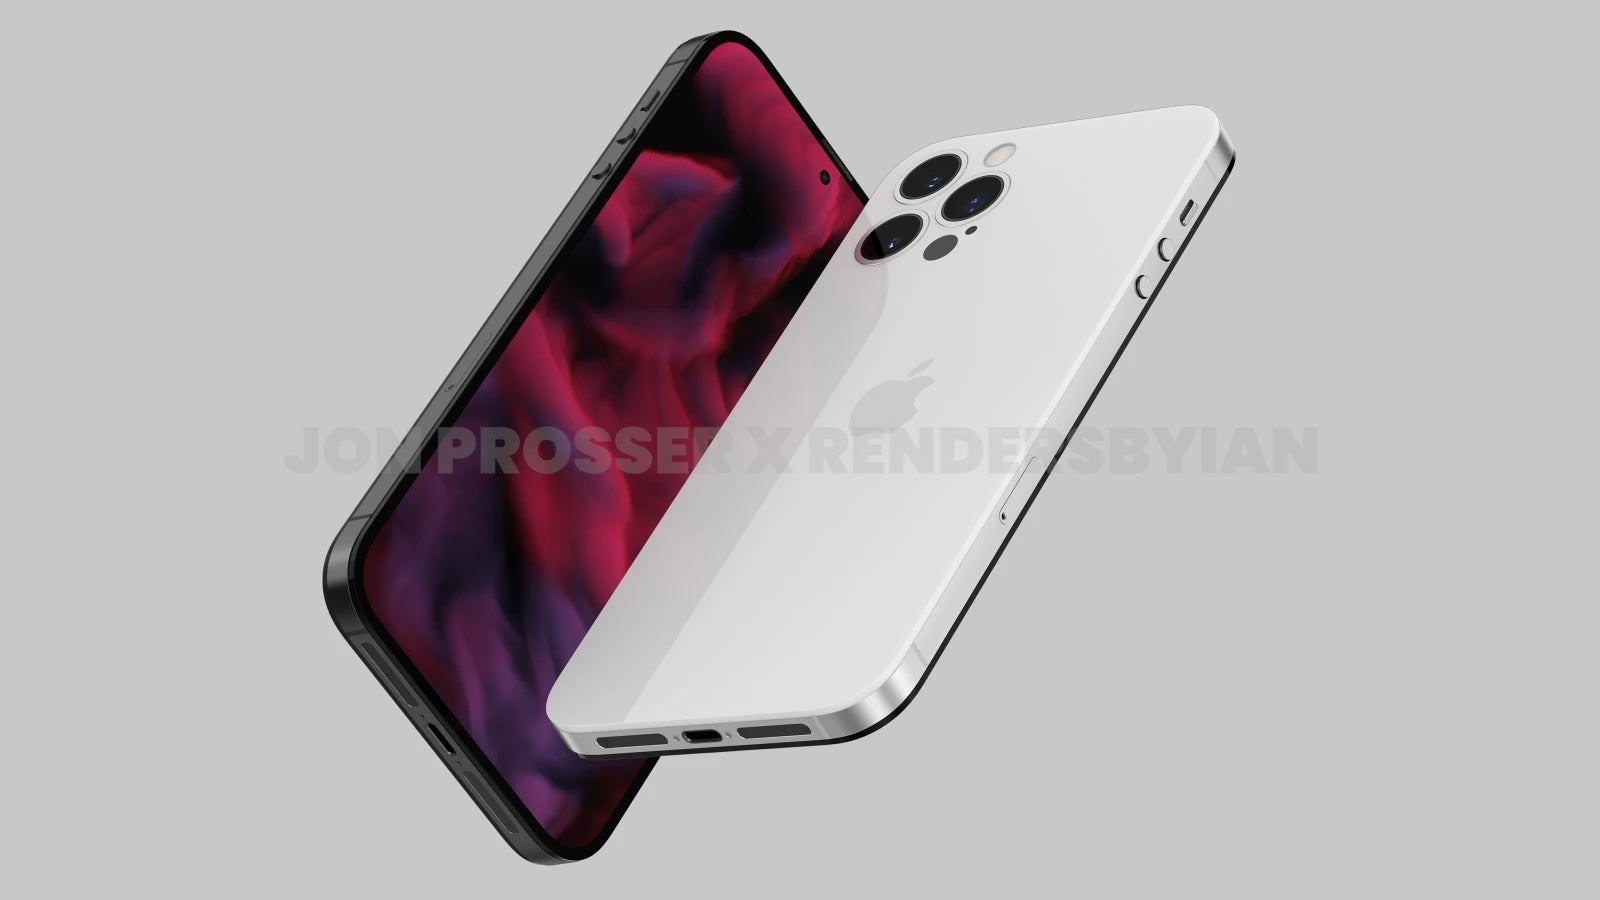 Render of the iPhone 14 Pro variant with flush camera module - Apple reportedly orders more A14 Bionic chips expecting strong demand for the 5G iPhone 13 series